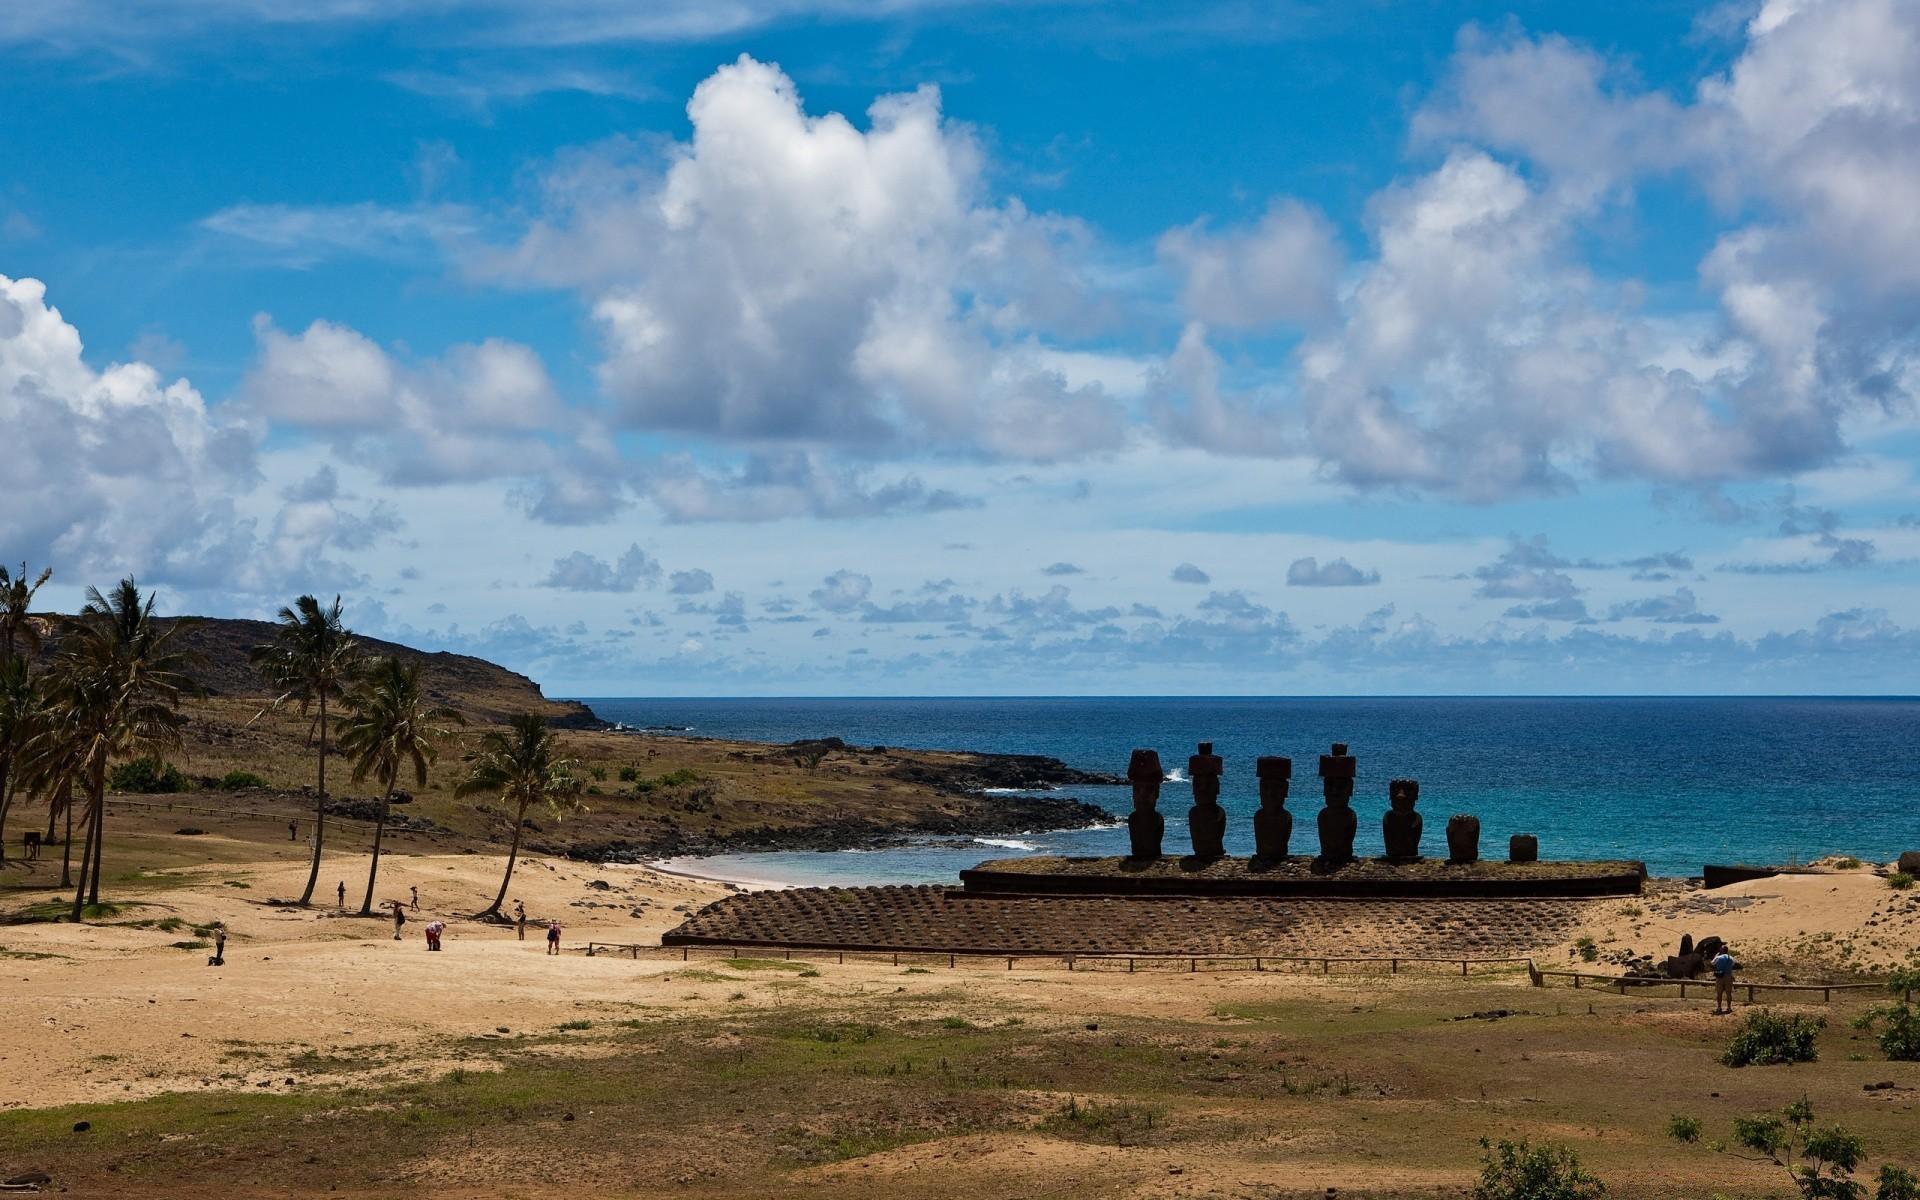 Easter Island Statues. Android wallpaper for free